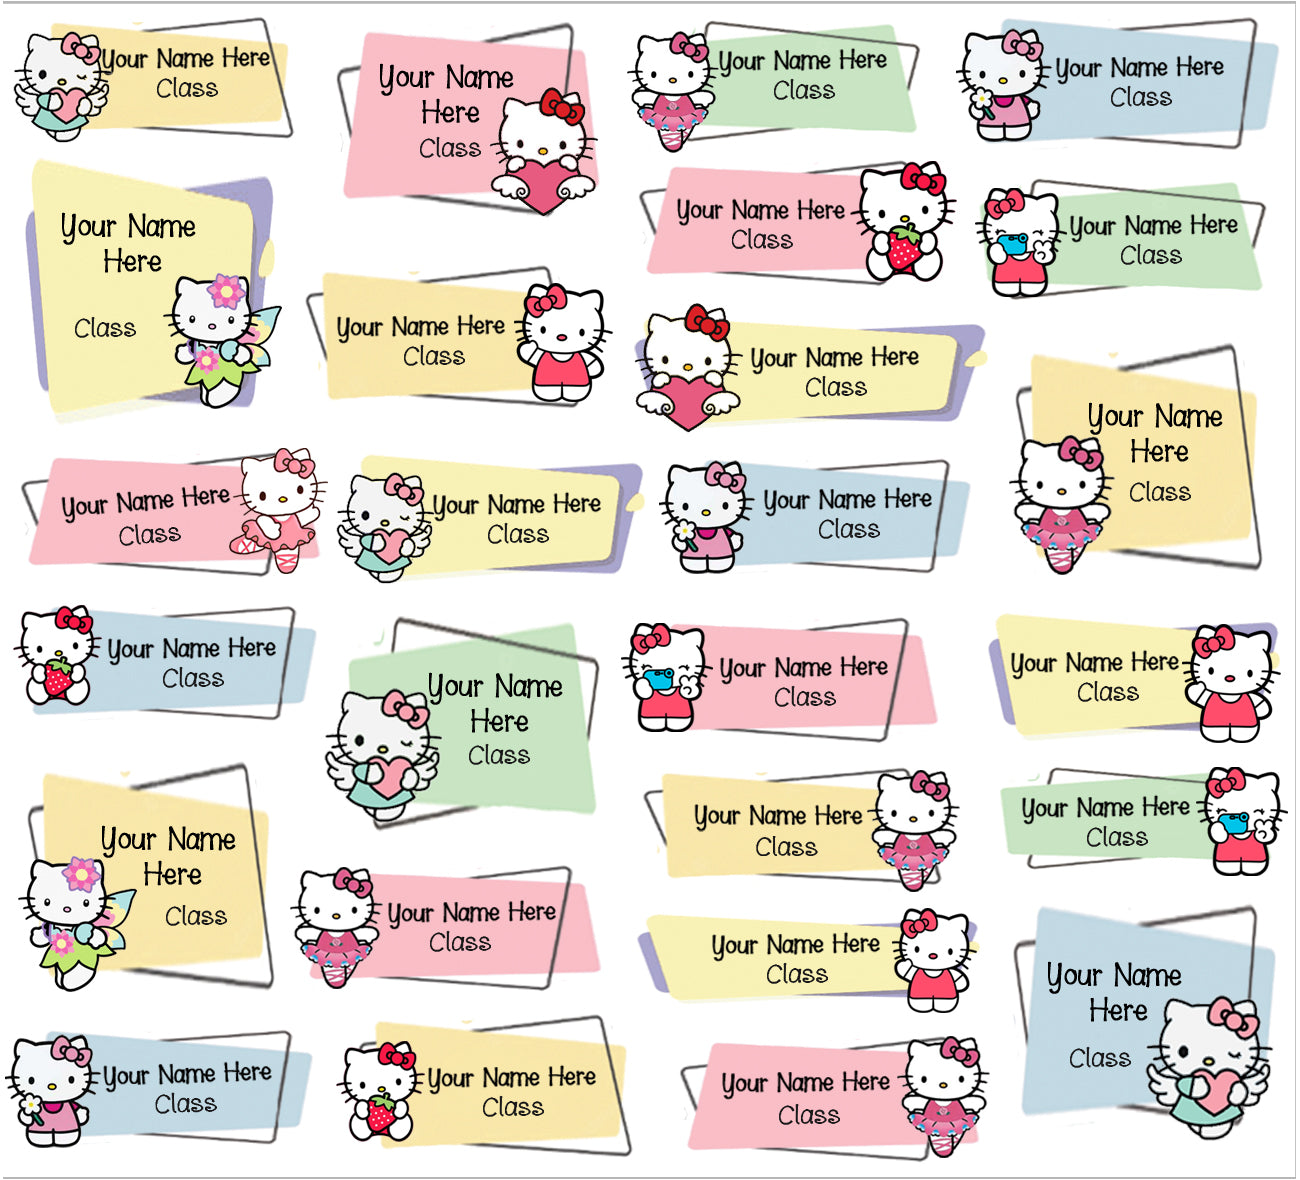 ""Hello Kitty" Separate items